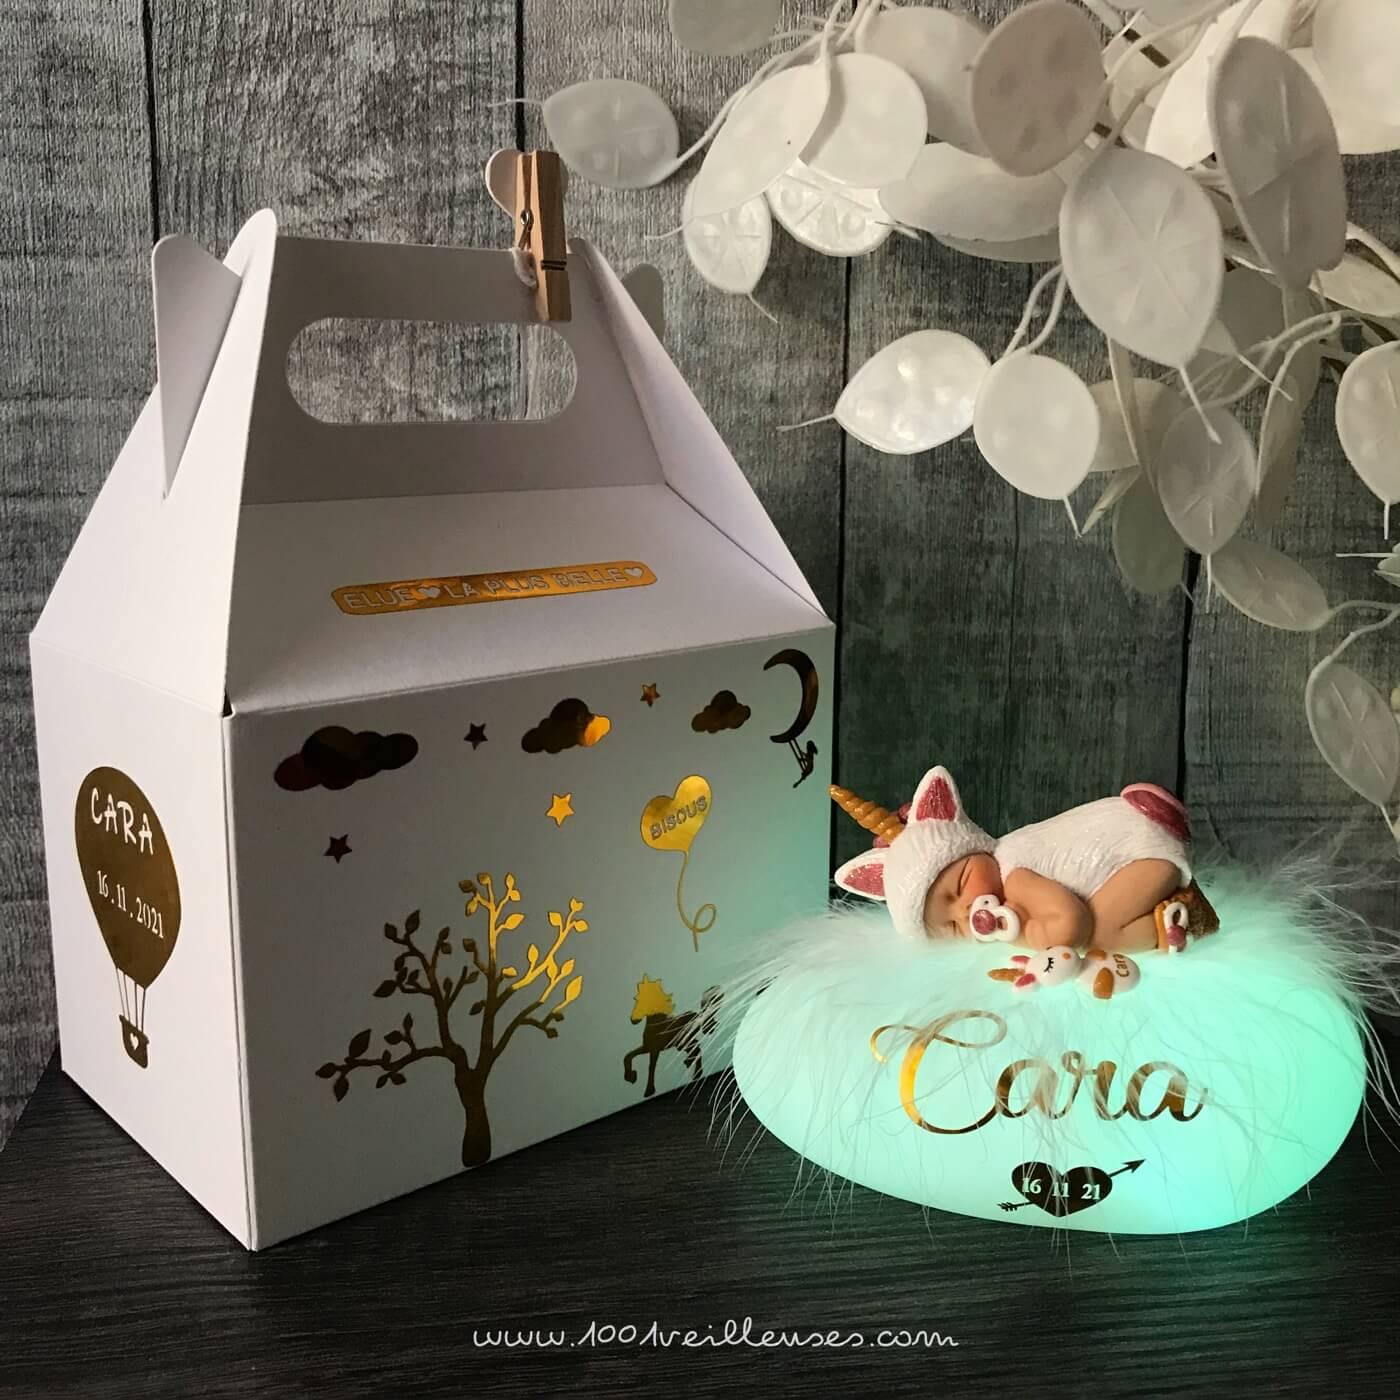 Customized night light in the shape of a glowing pebble with a baby girl dressed as a unicorn, accompanied by a gift box